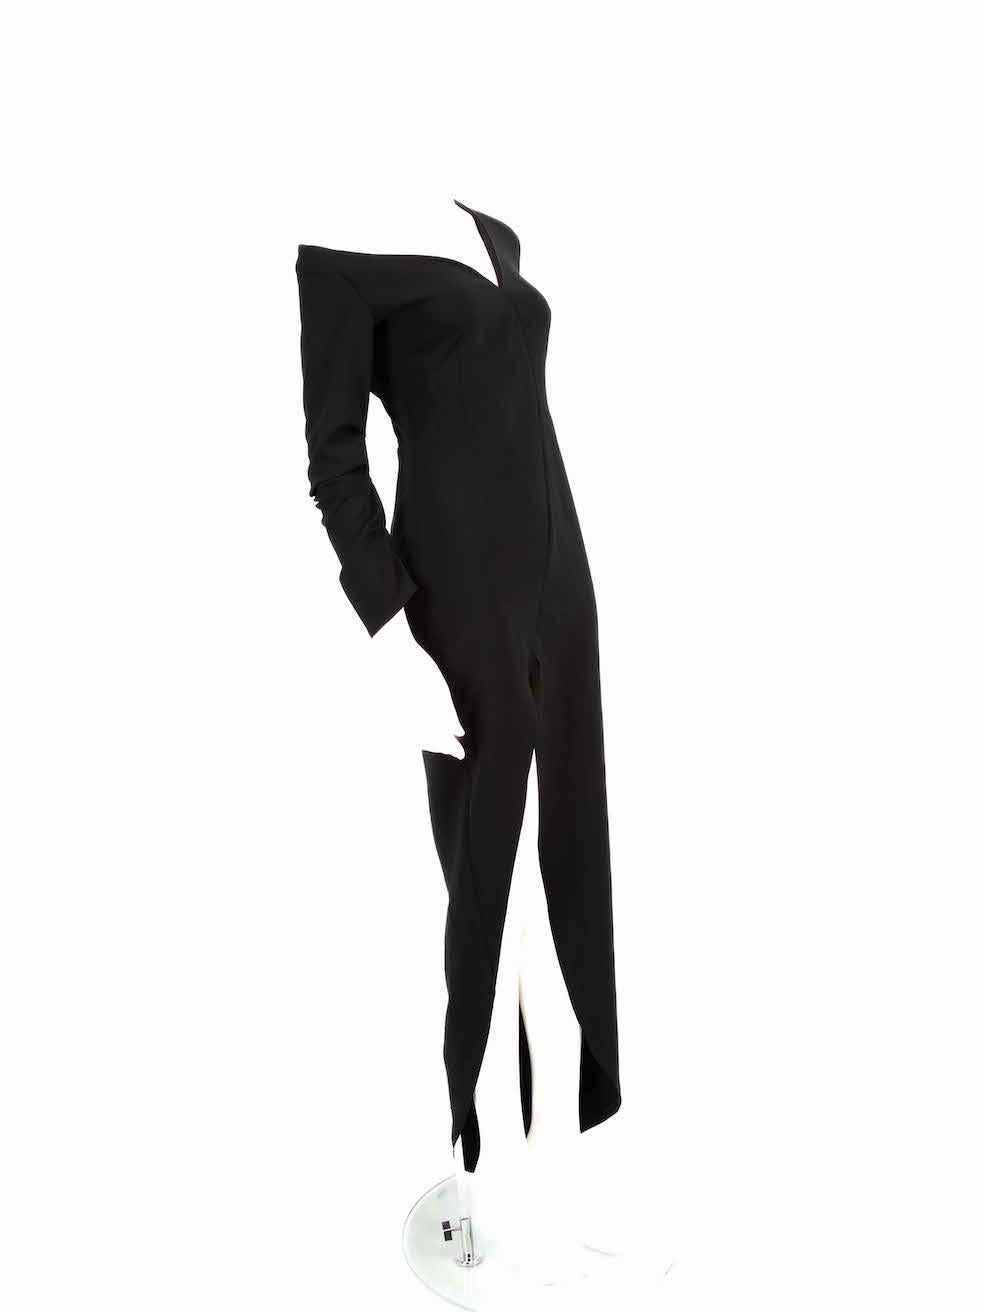 CONDITION is Never worn, with tags. No visible wear to dress is evident on this new A.W.A.K.E. MODE designer resale item.
 
 
 
 Details
 
 
 Black
 
 Polyester
 
 Dress
 
 Asymmetric v-neck
 
 Maxi
 
 High leg slit
 
 Long ruched sleeves
 
 Back